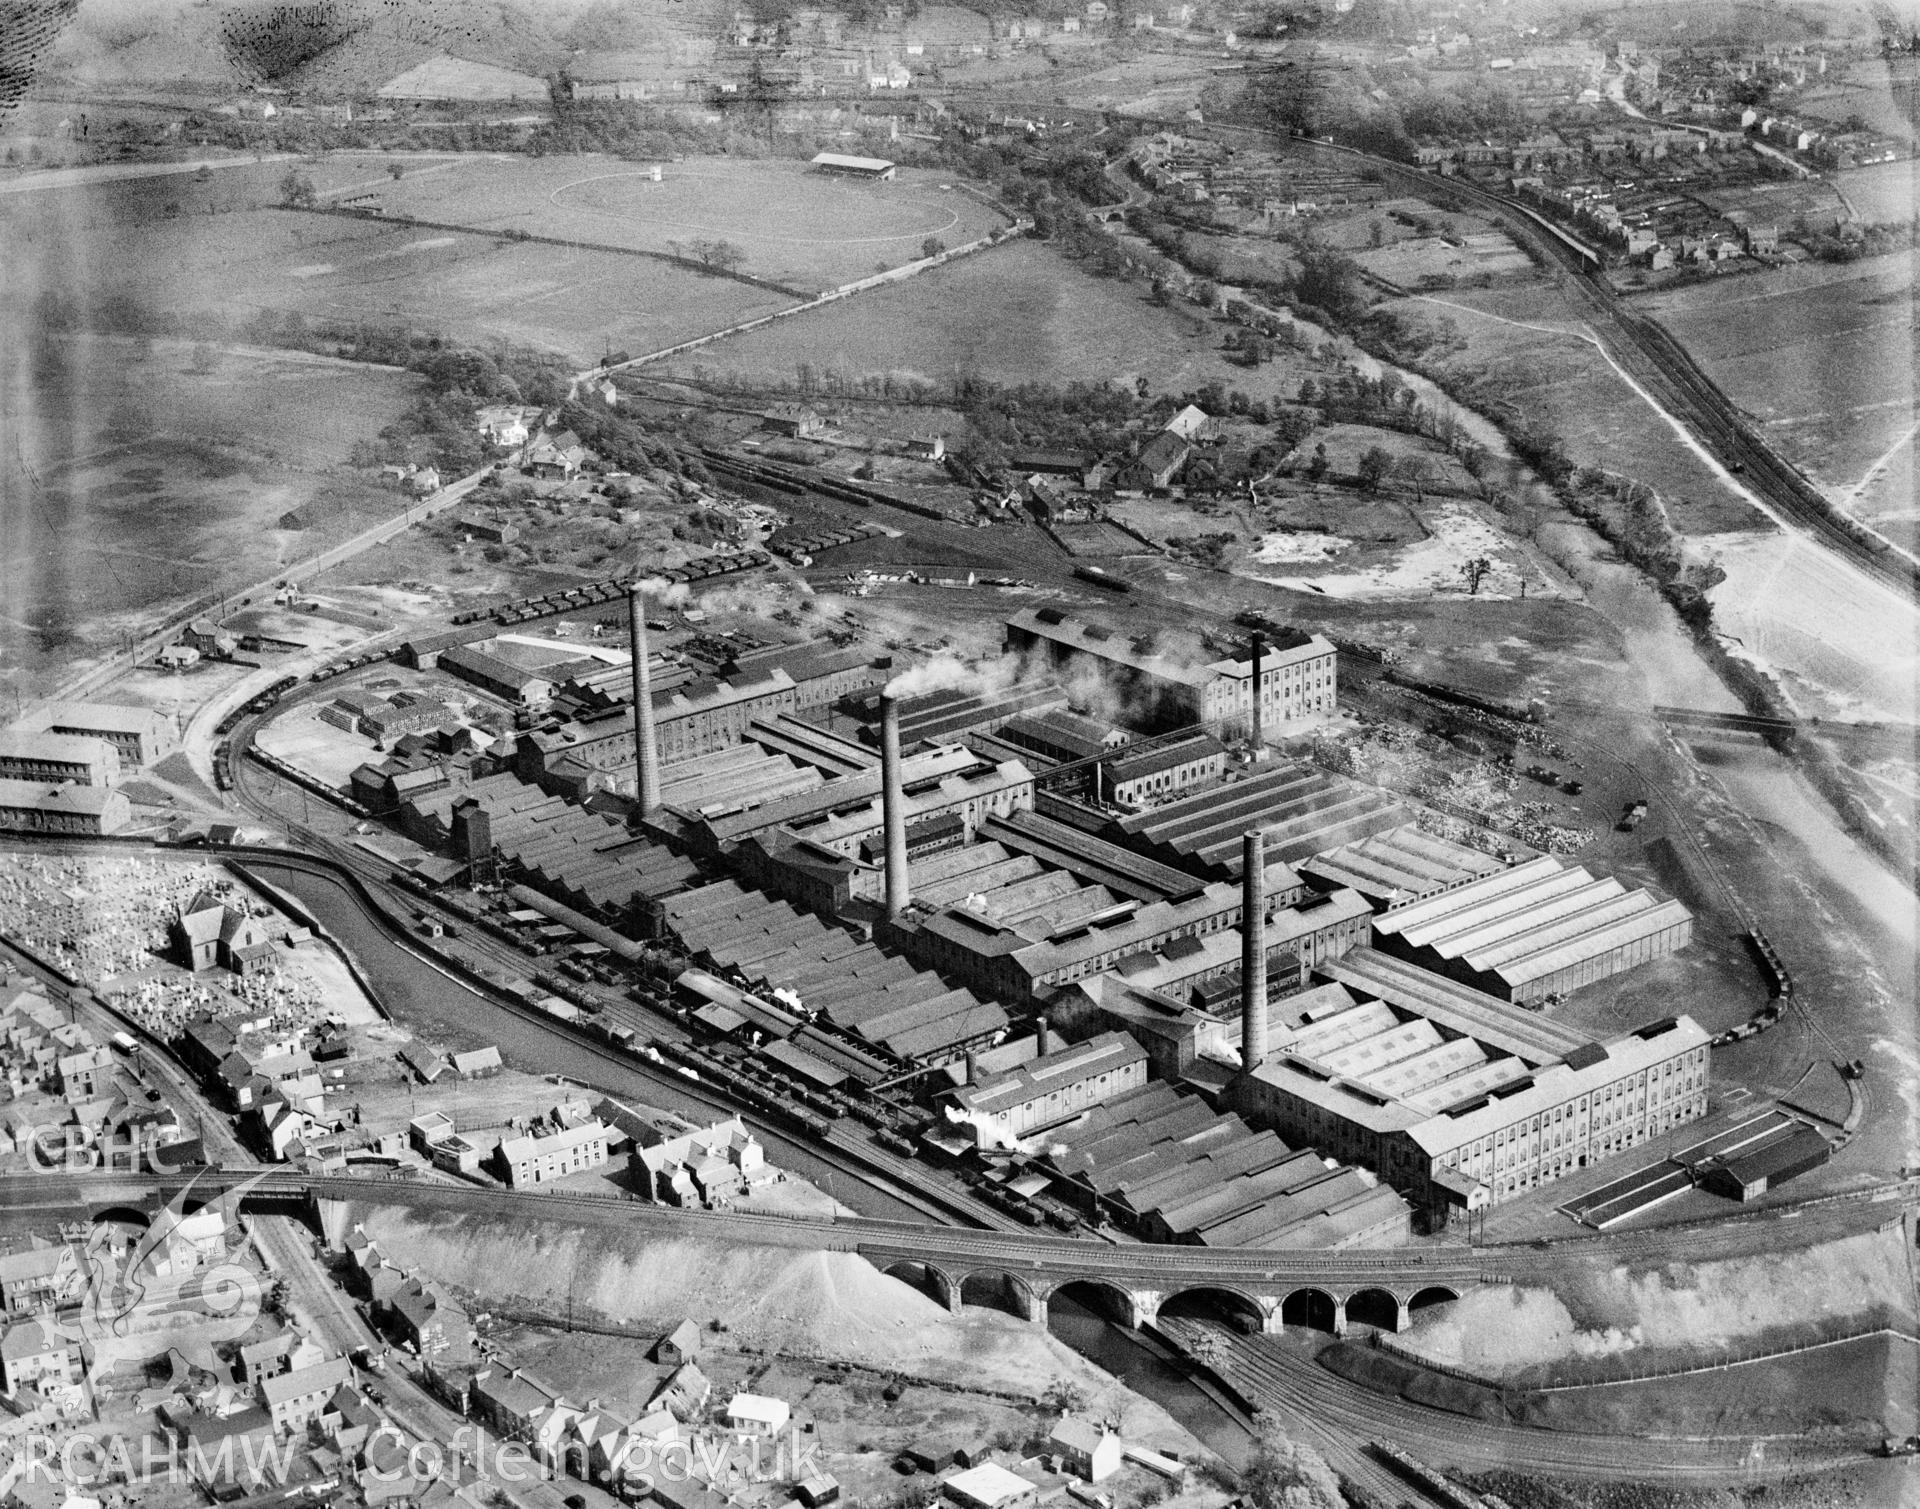 View of Mond Nickel Co., Clydach, oblique aerial view. 5?x4? black and white glass plate negative.